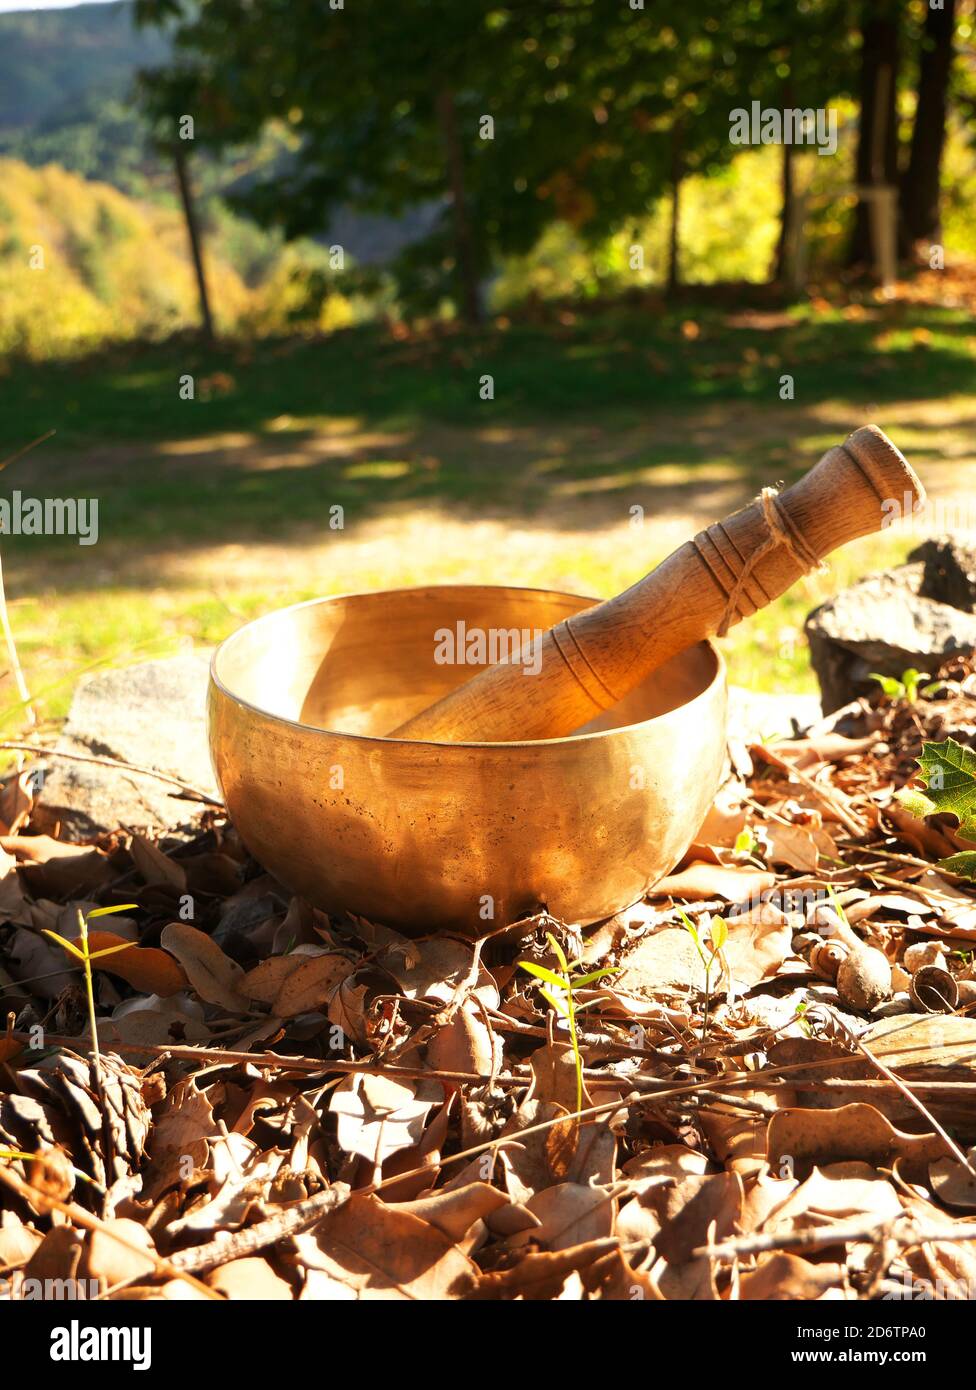 Singing bowl placed on autumn leaves with the forest in the background, during the sunset. Stock Photo